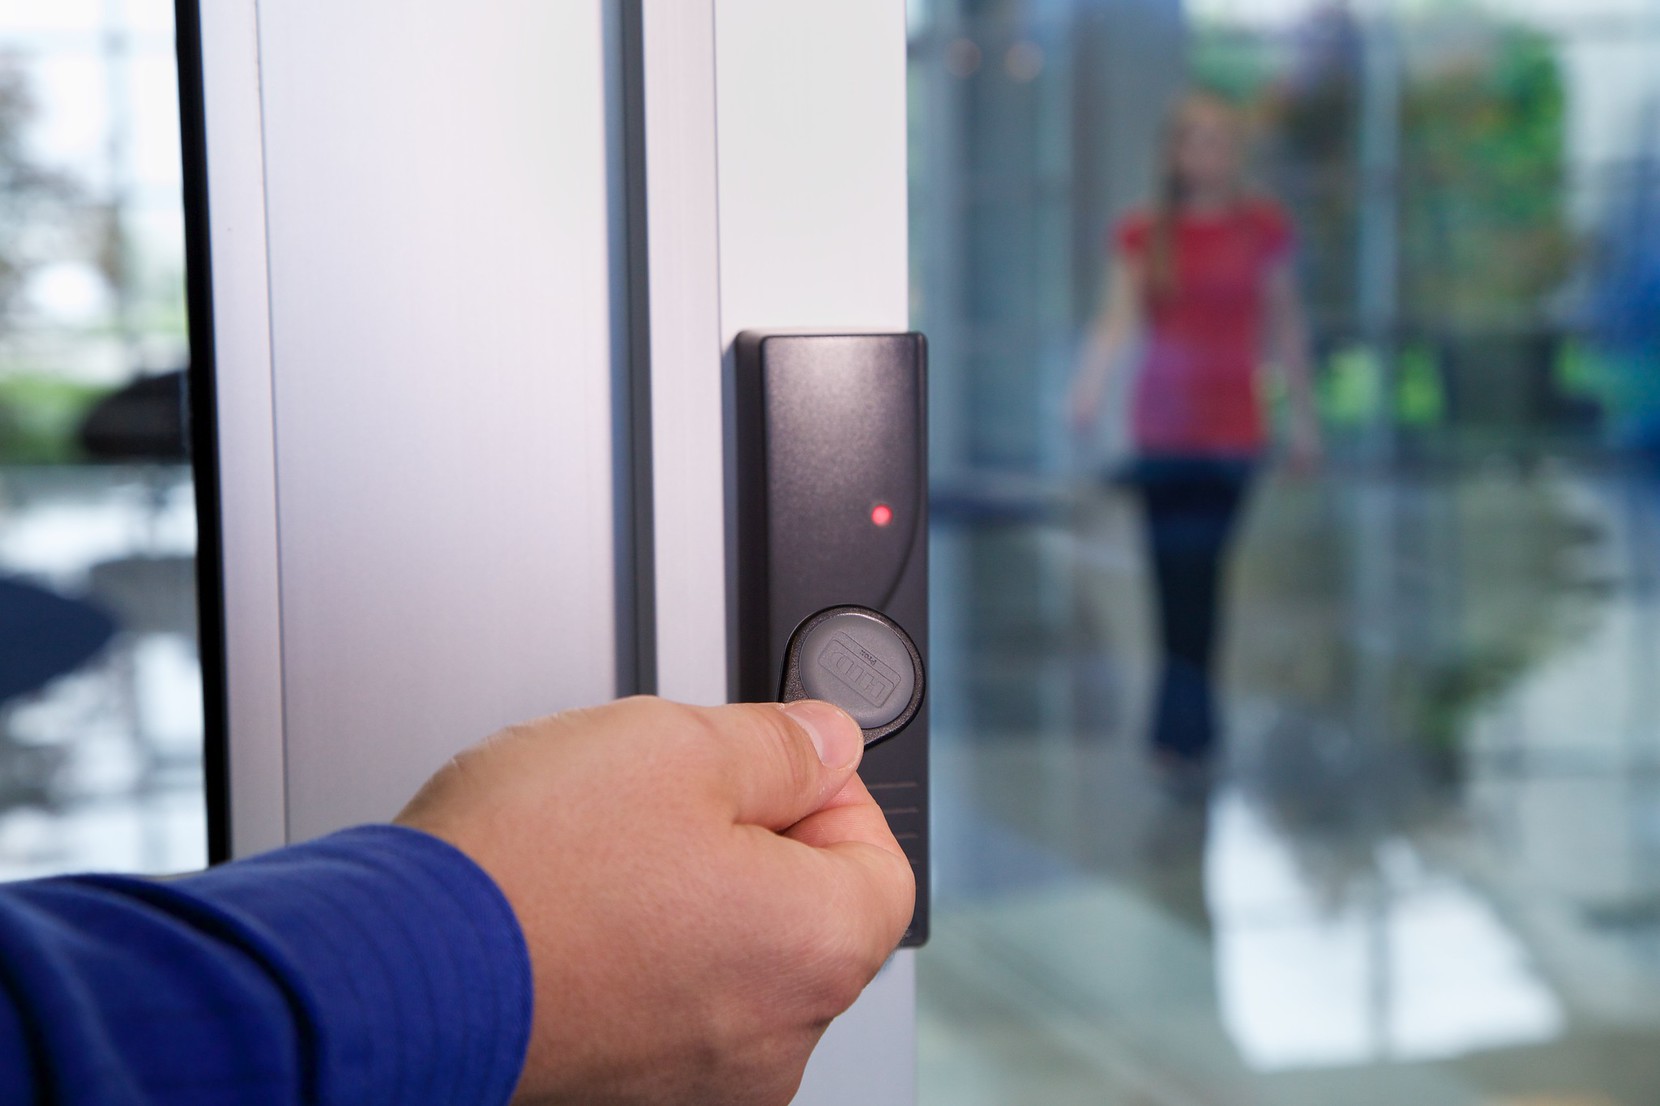 FOB based access control system in action.